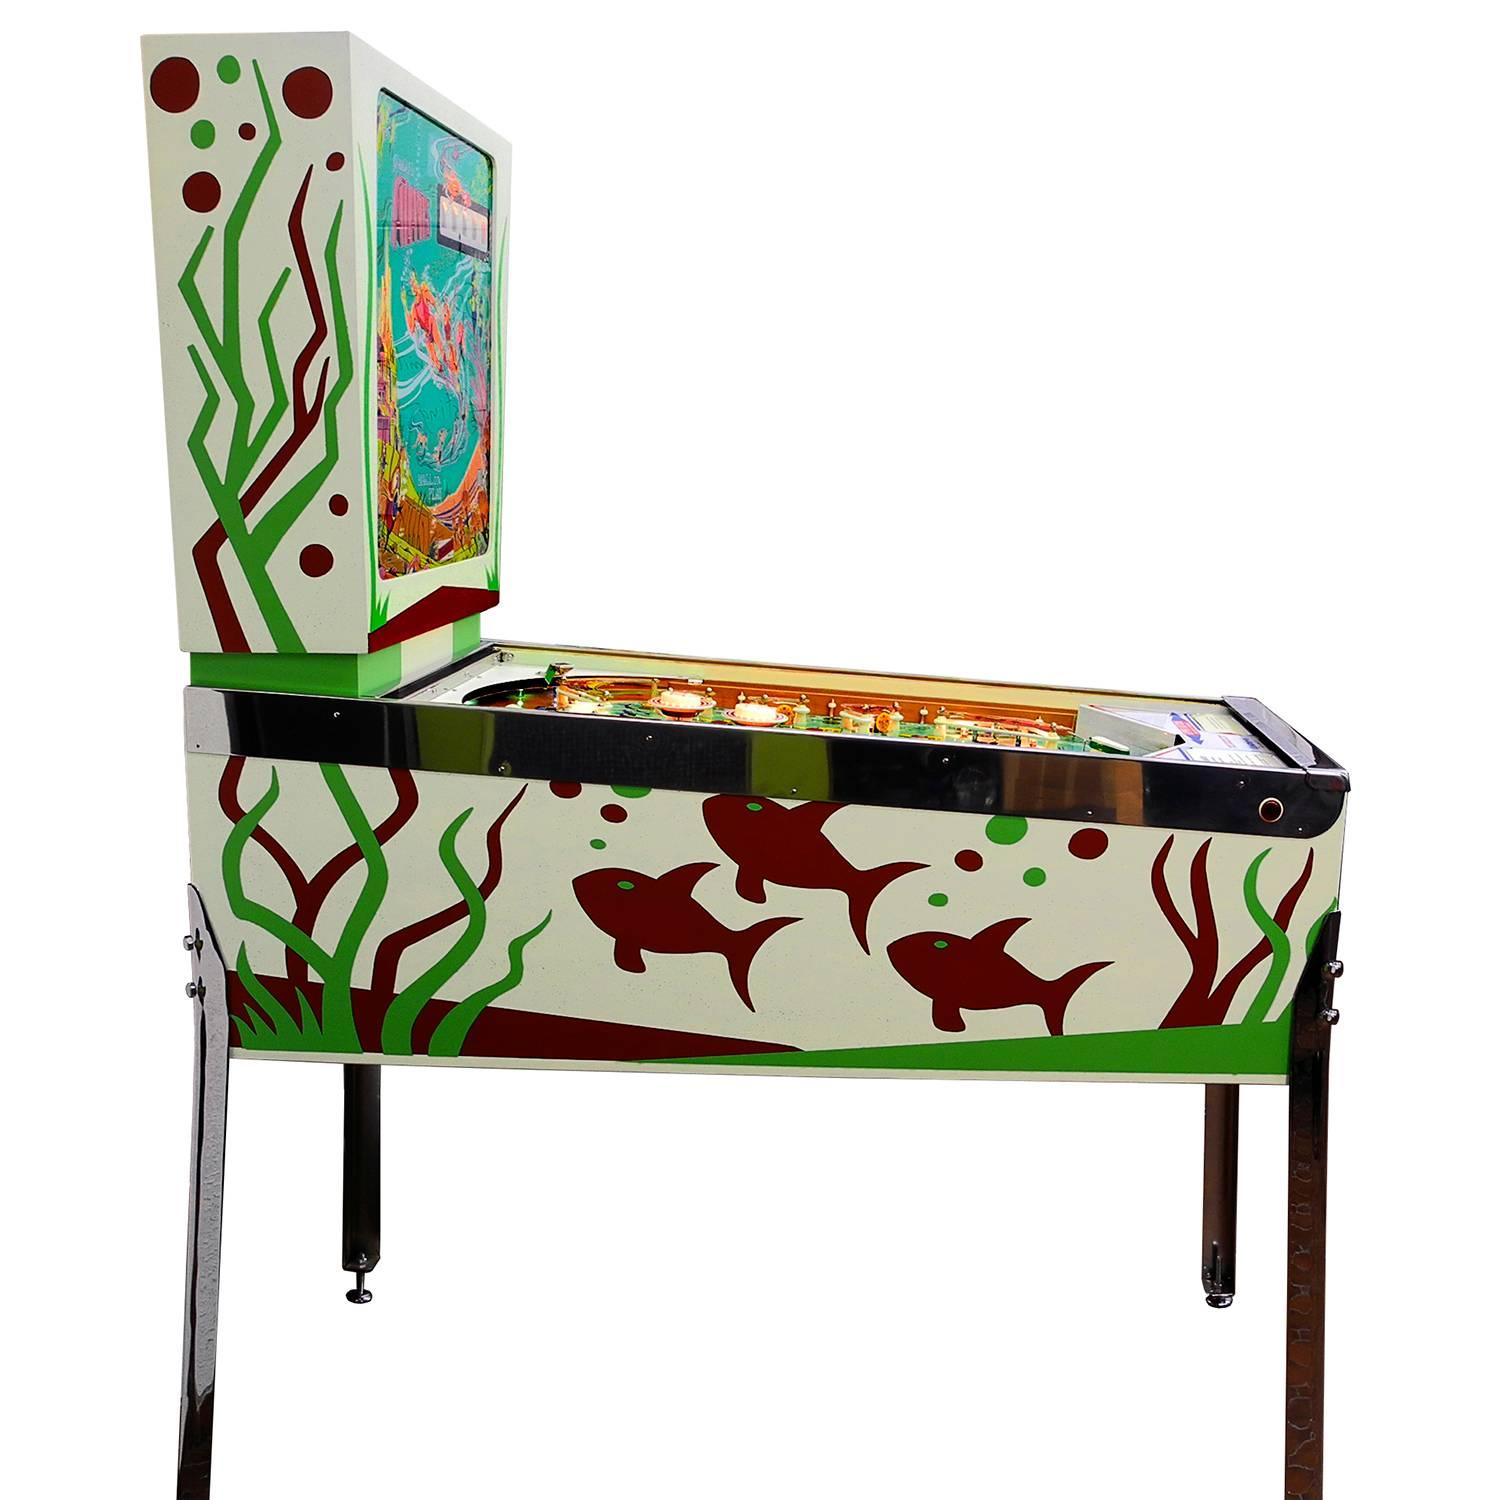 Make: Gottlieb
Date of Built: January 1975
Designer: Ed Krynski
Artwork: Gordon Morison
Number made: 2.250
Origin: Bern, Switzerland

A classic Gottlieb 1-player wedge head pinball game from the mid 70's. Due to its low production number and